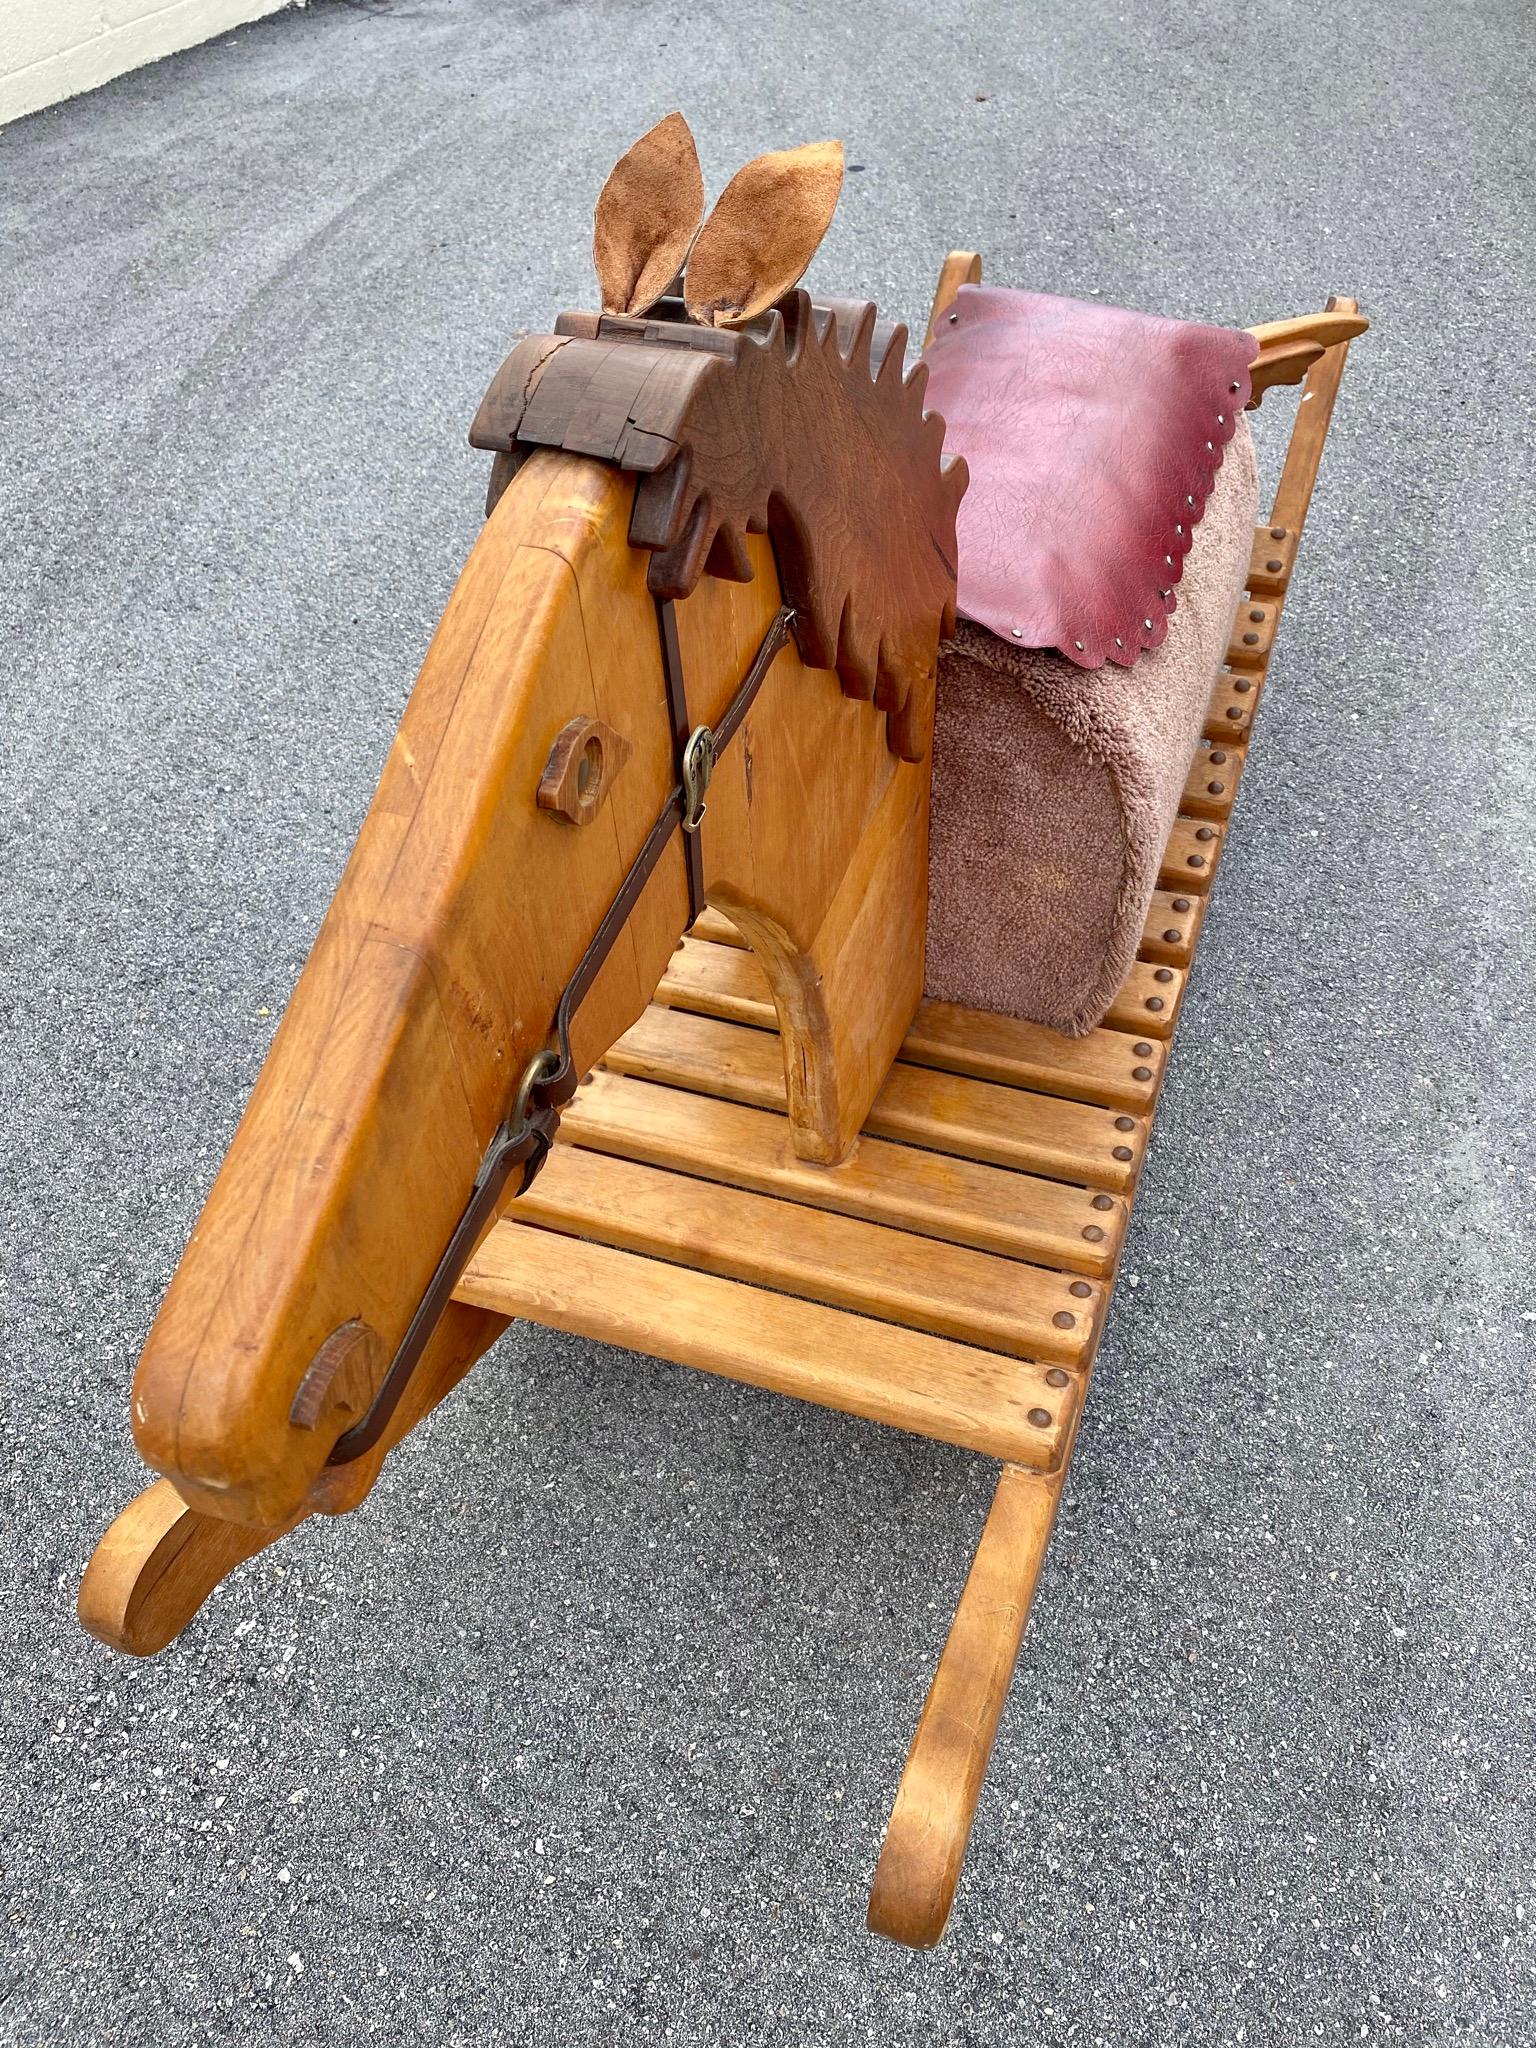 1960s Folk Art Rustic Hand Carved Monumental Rocking Horse Chair For Sale 3